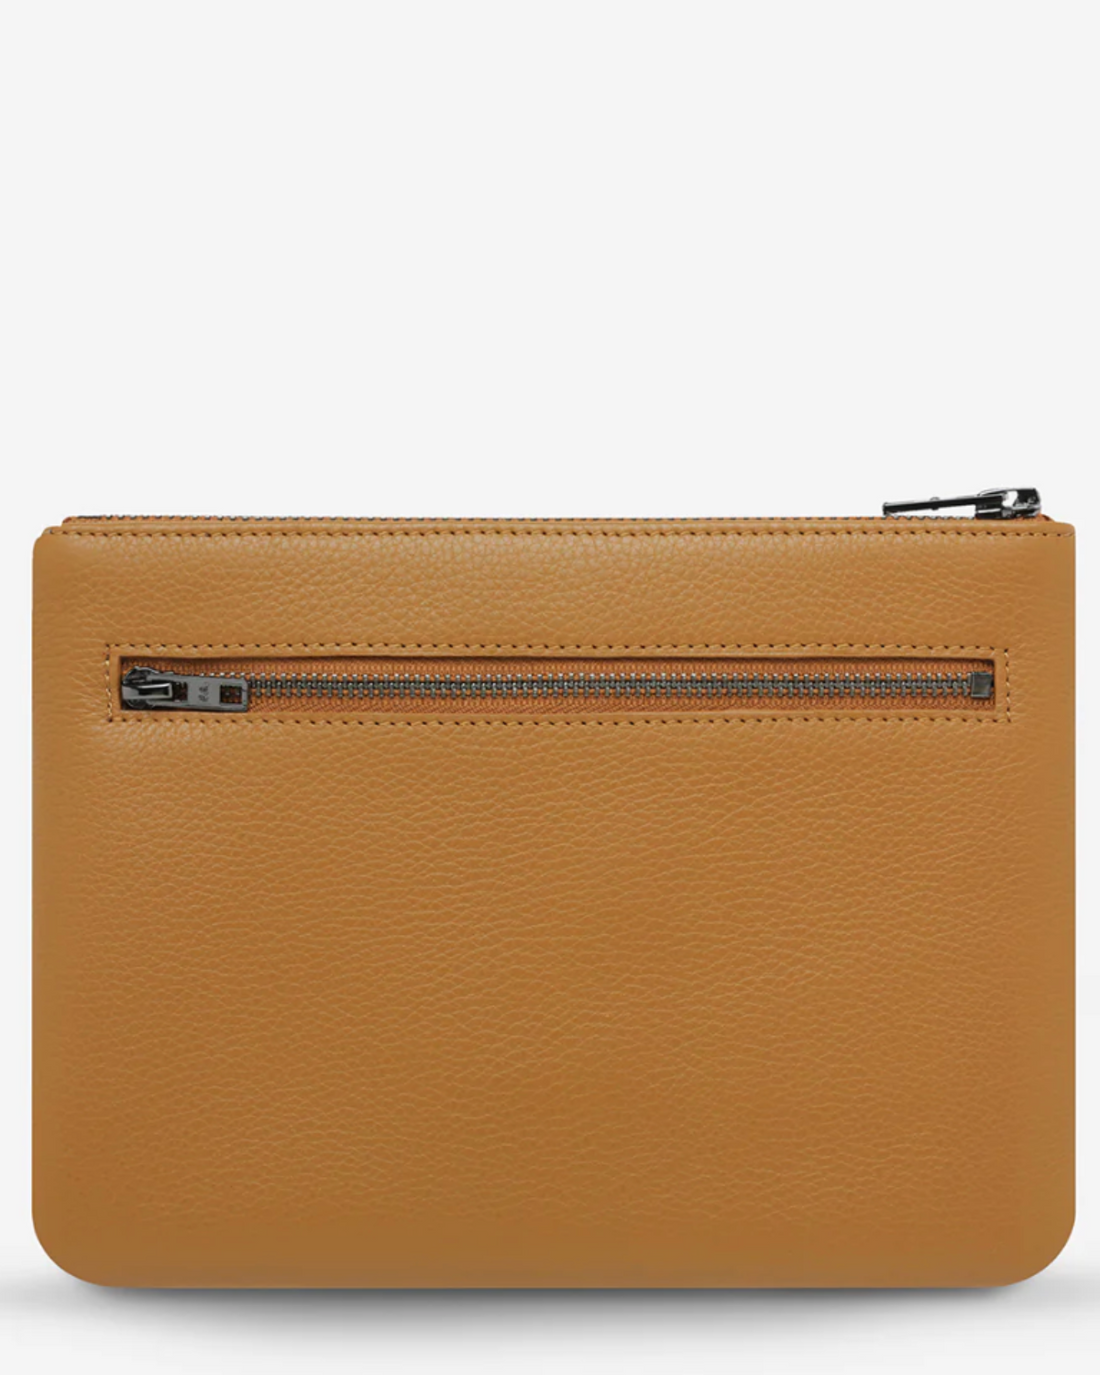 New Day Clutch ~ Tan By Status Anxiety